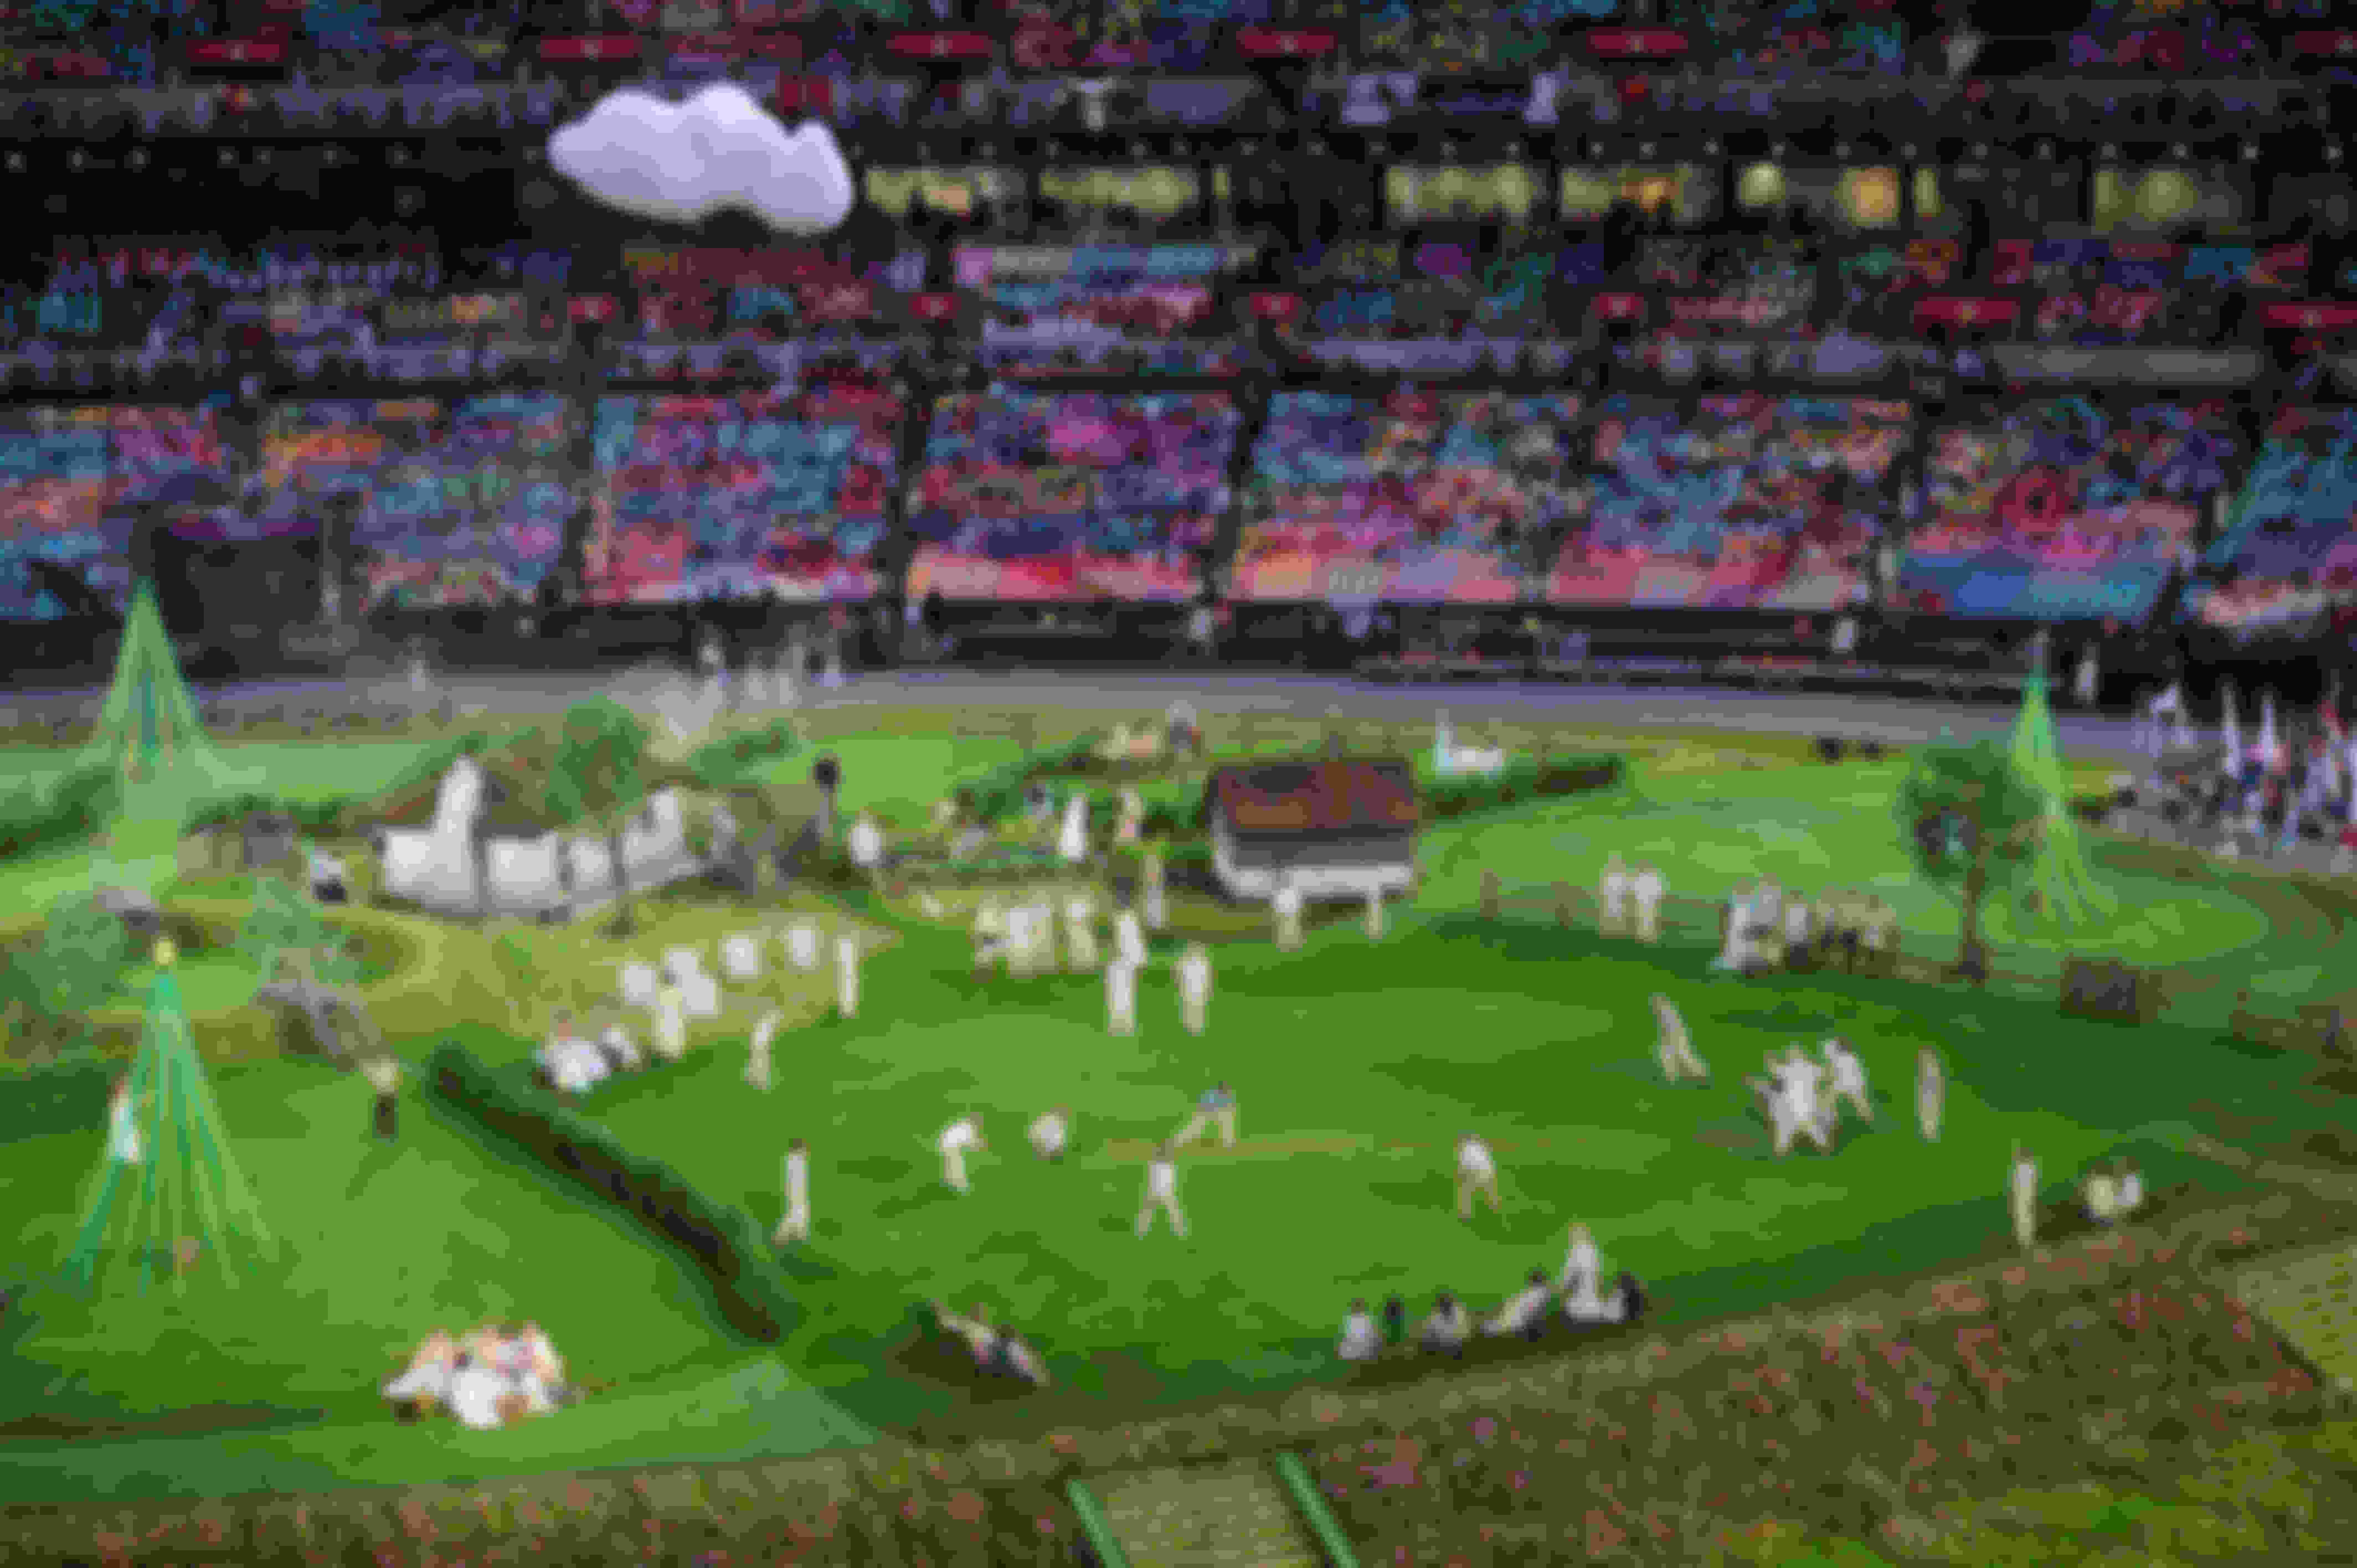 Cricket in Olympics played out during the preshow prior to the opening ceremony of the London 2012 Games.